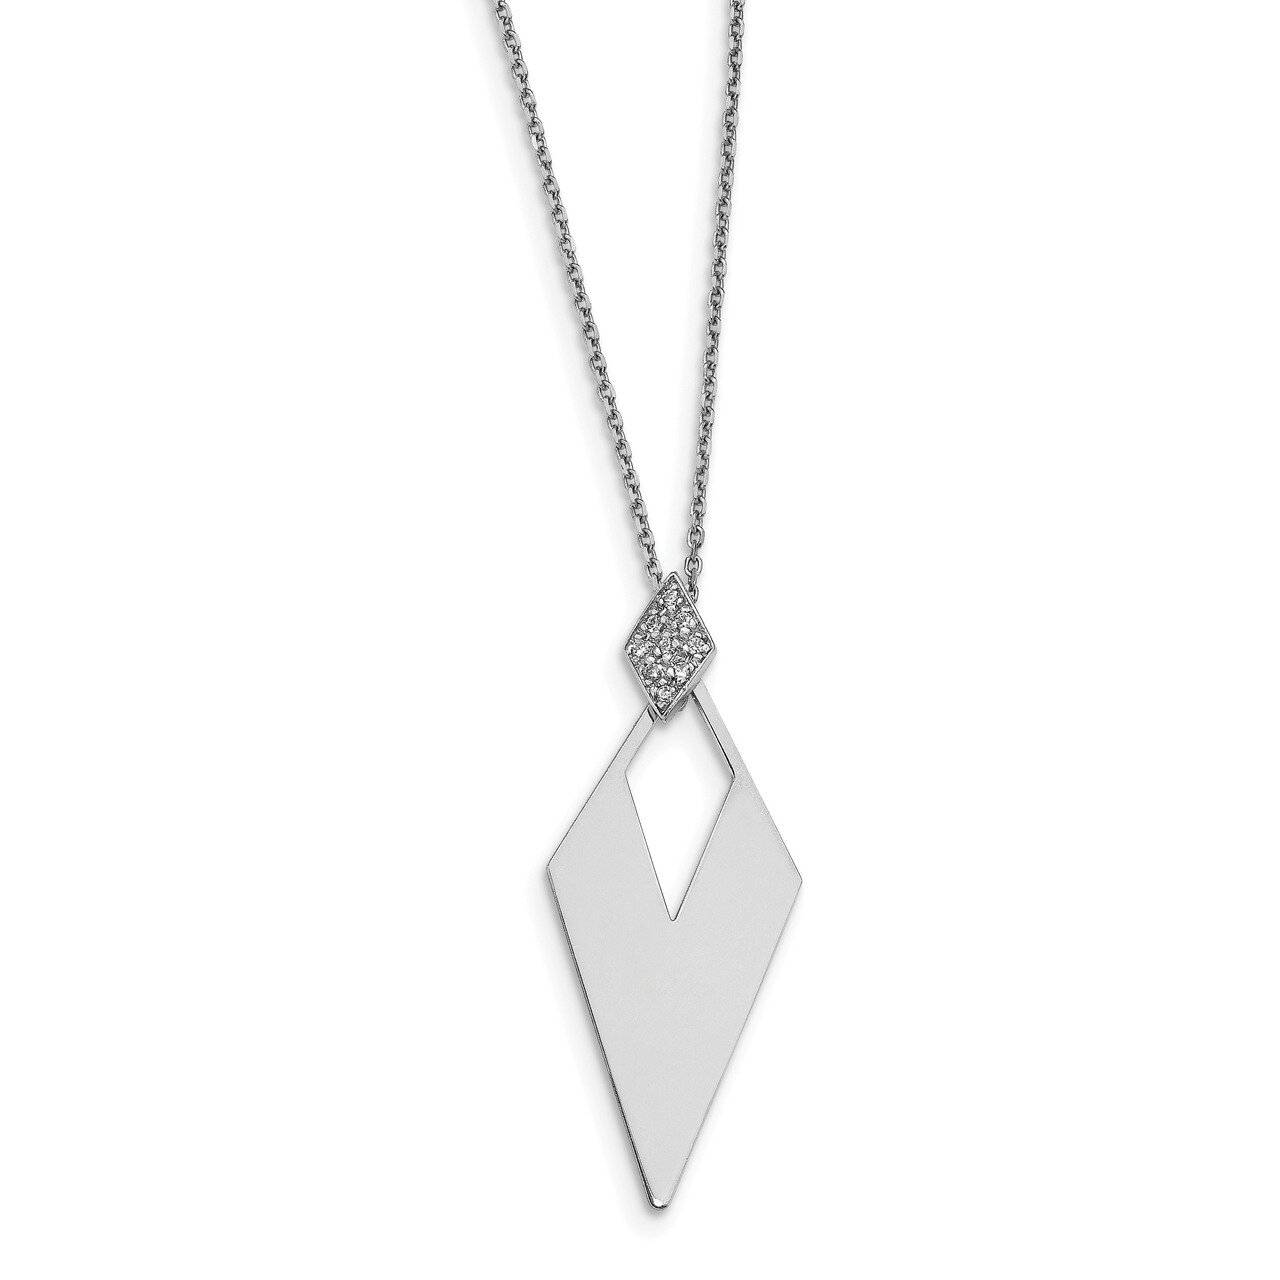 Crystal Diamond Shape with 1 inch Extender Necklace 16.5 Inch Sterling Silver Polished HB-QLF945-16.5